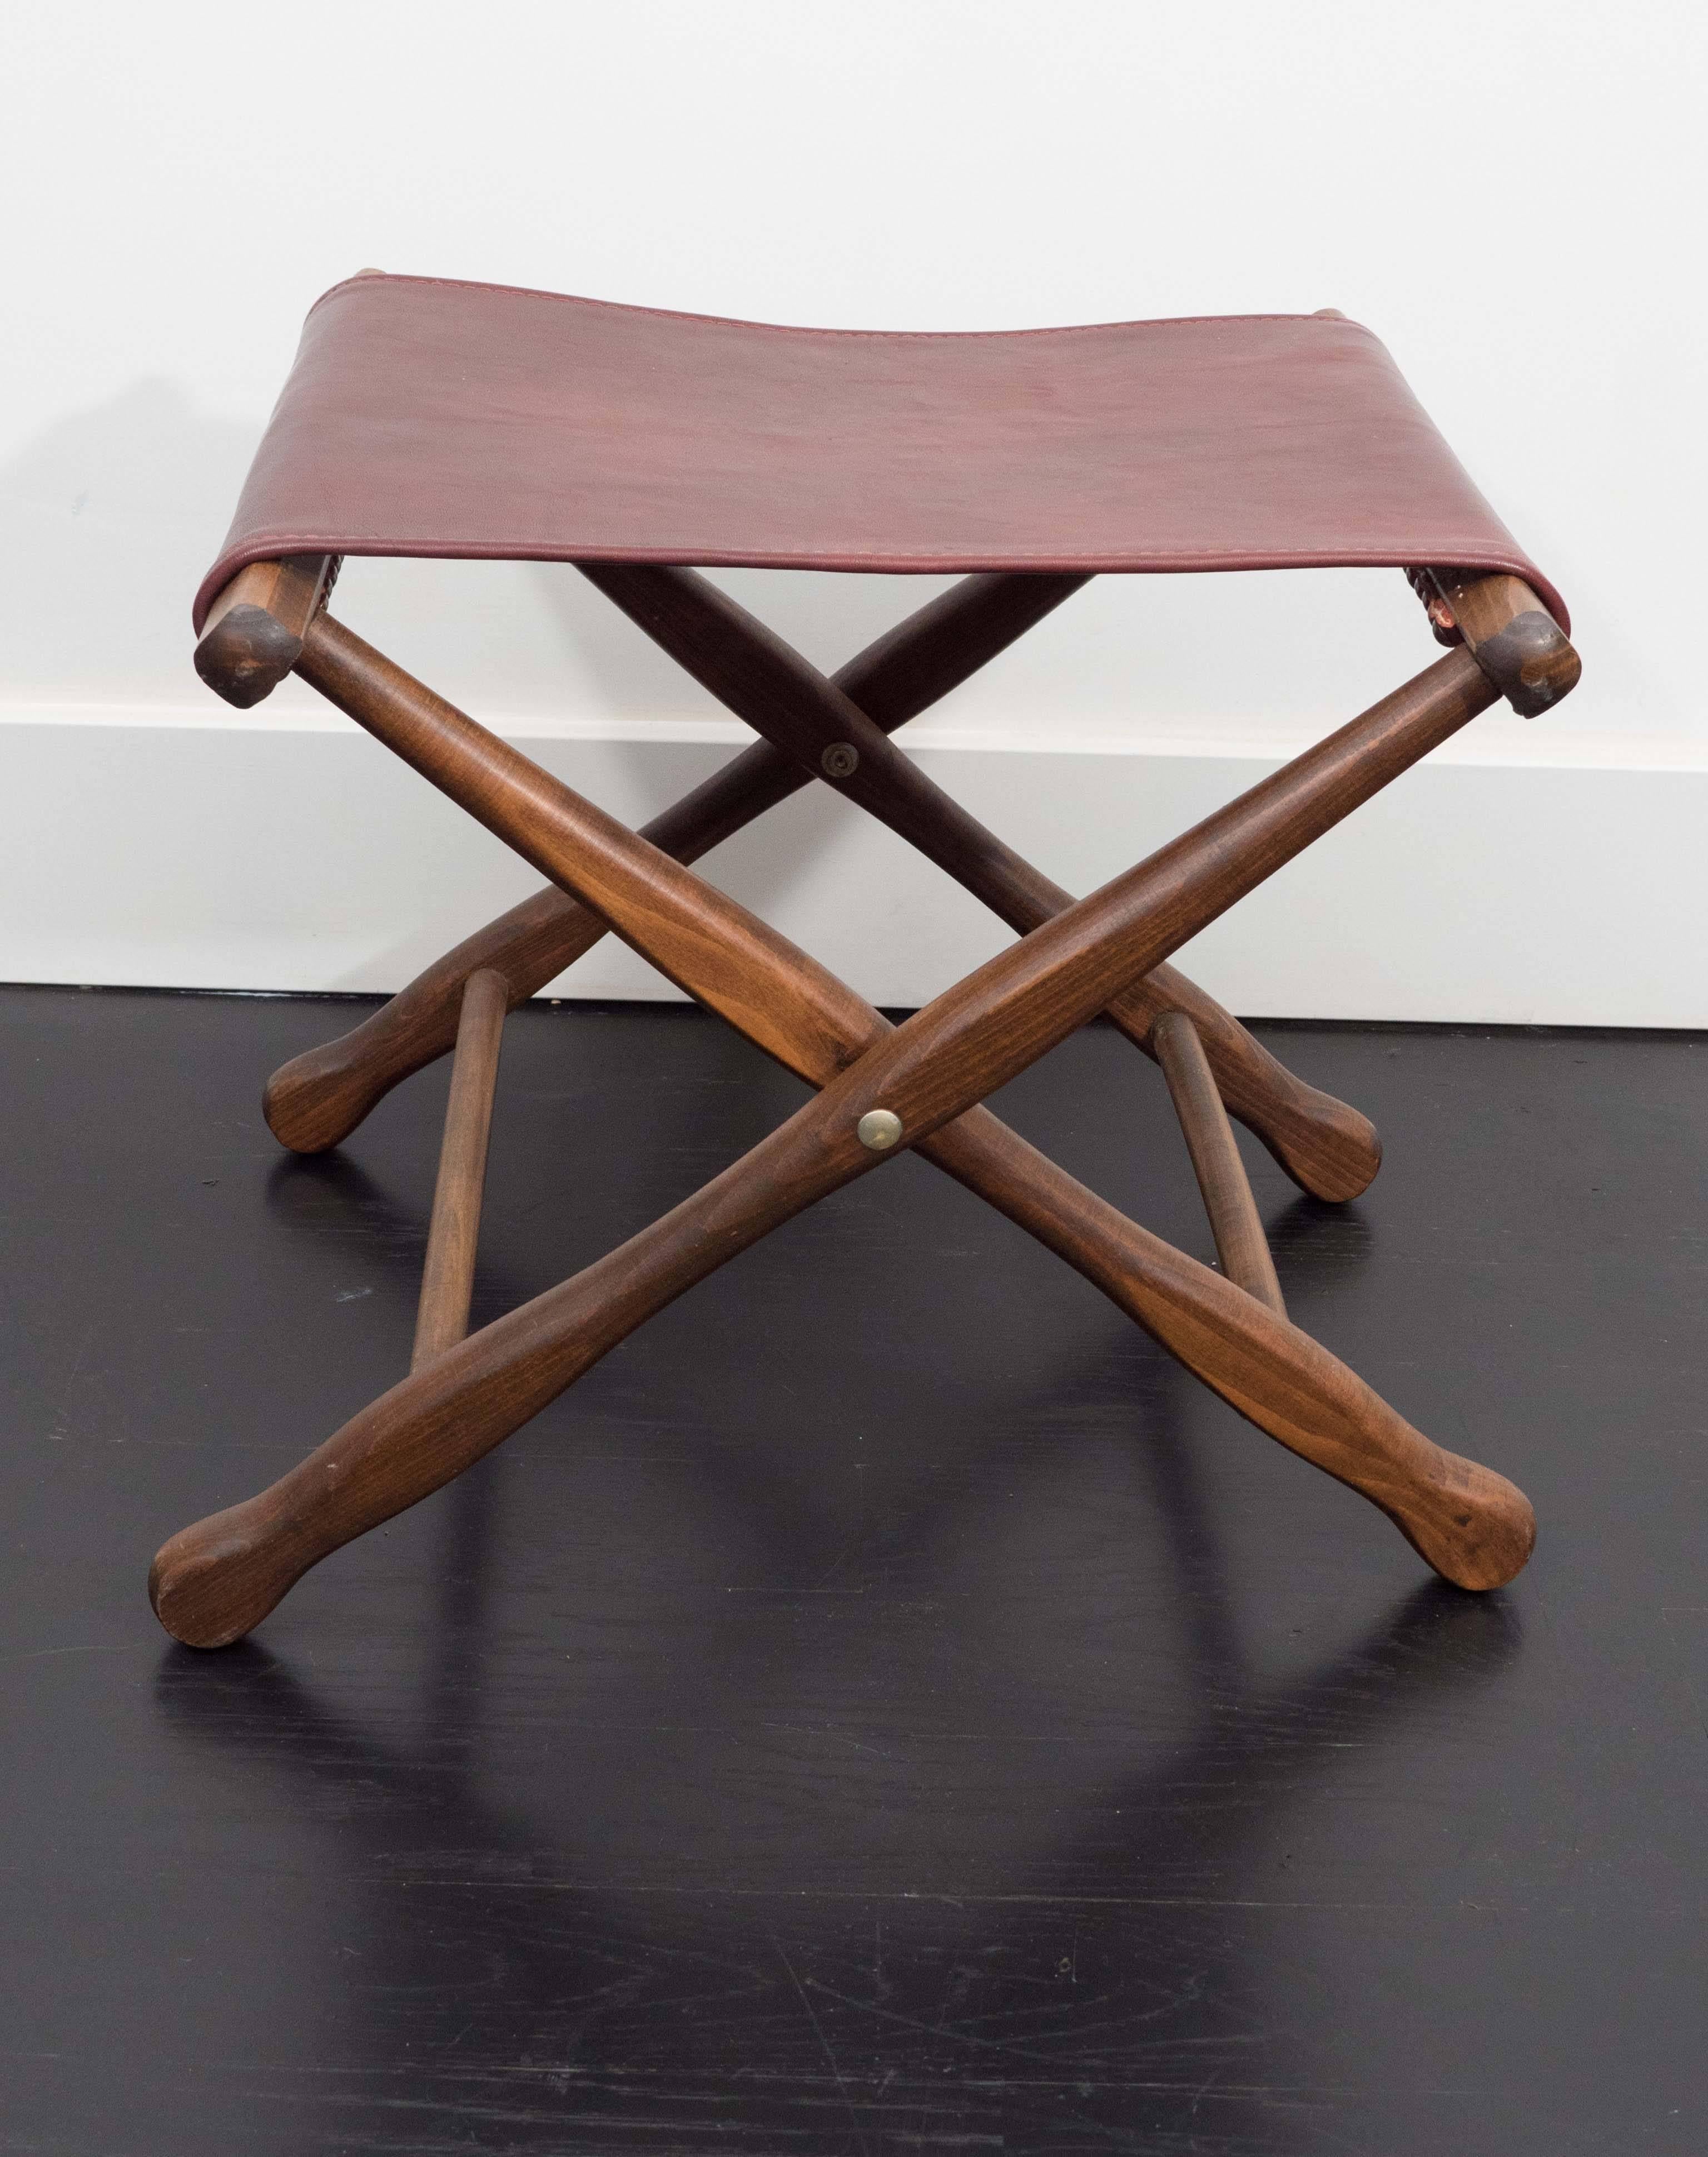 Pair of folding stools in walnut and leather, sling freshly replaced.